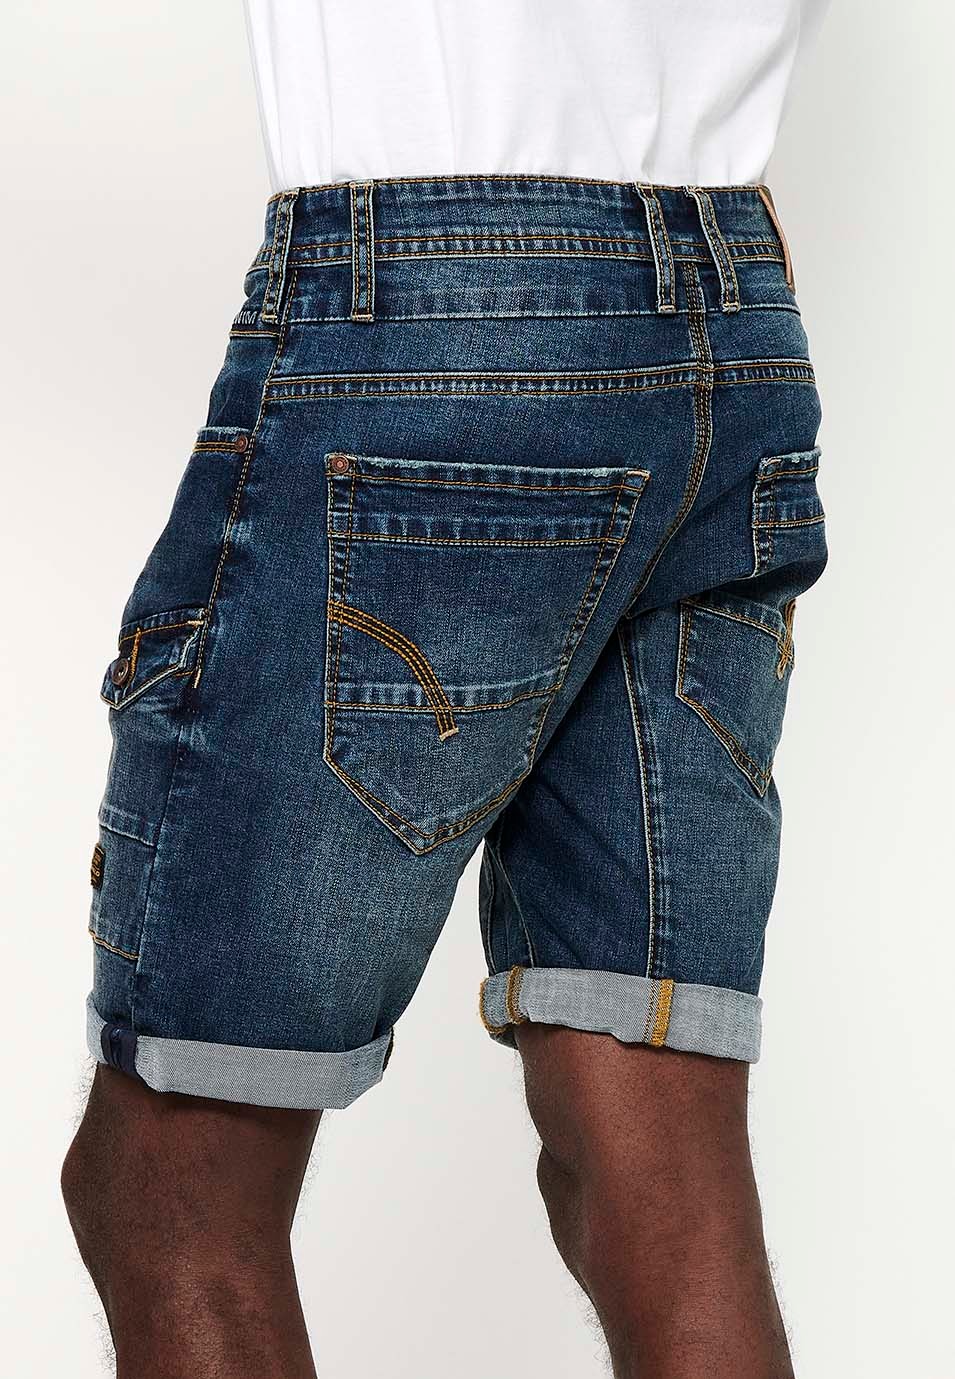 Denim Bermuda Shorts with Turn-Up Finish and Front Zipper and Button Closure with Five Pockets, One Pocket Pocket with Blue Front Details for Men 3